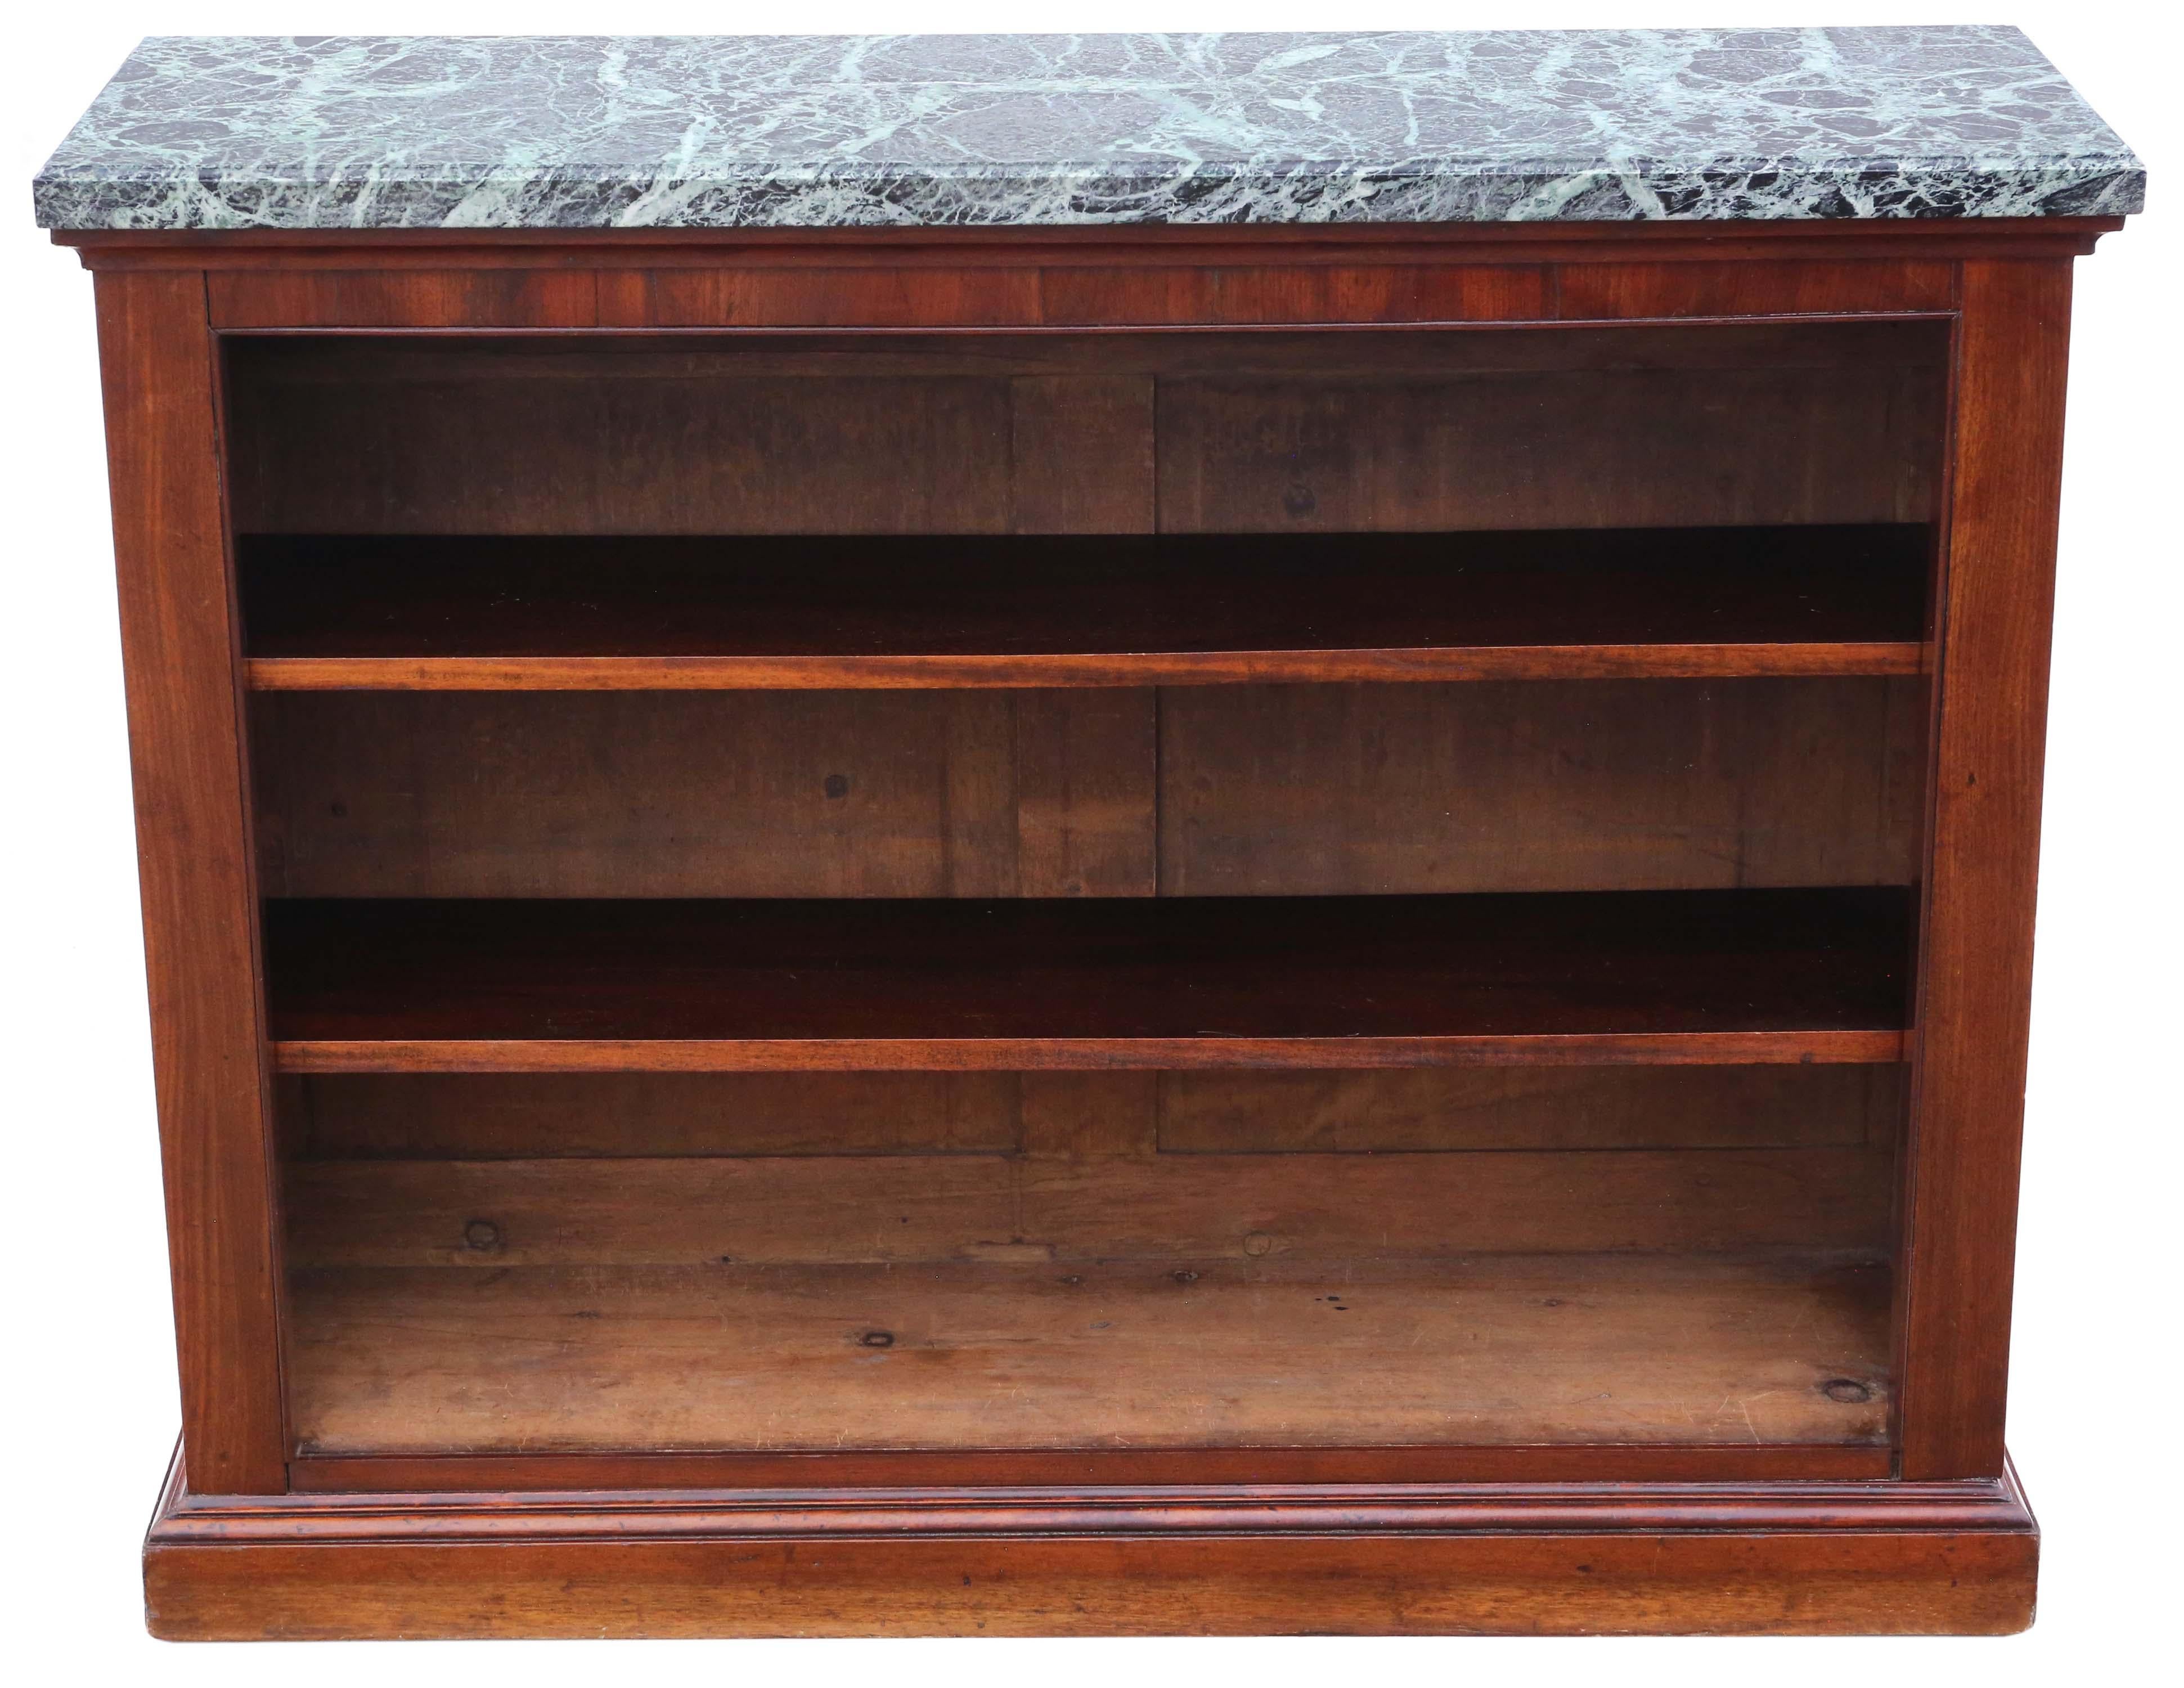 Antique large fine quality 19th Century mahogany and marble bookcase.

This is a lovely quality bookcase, that is full of age, charm and character.

Solid, with no loose joints and no woodworm.

The shelves are held in place by fixed supports. We